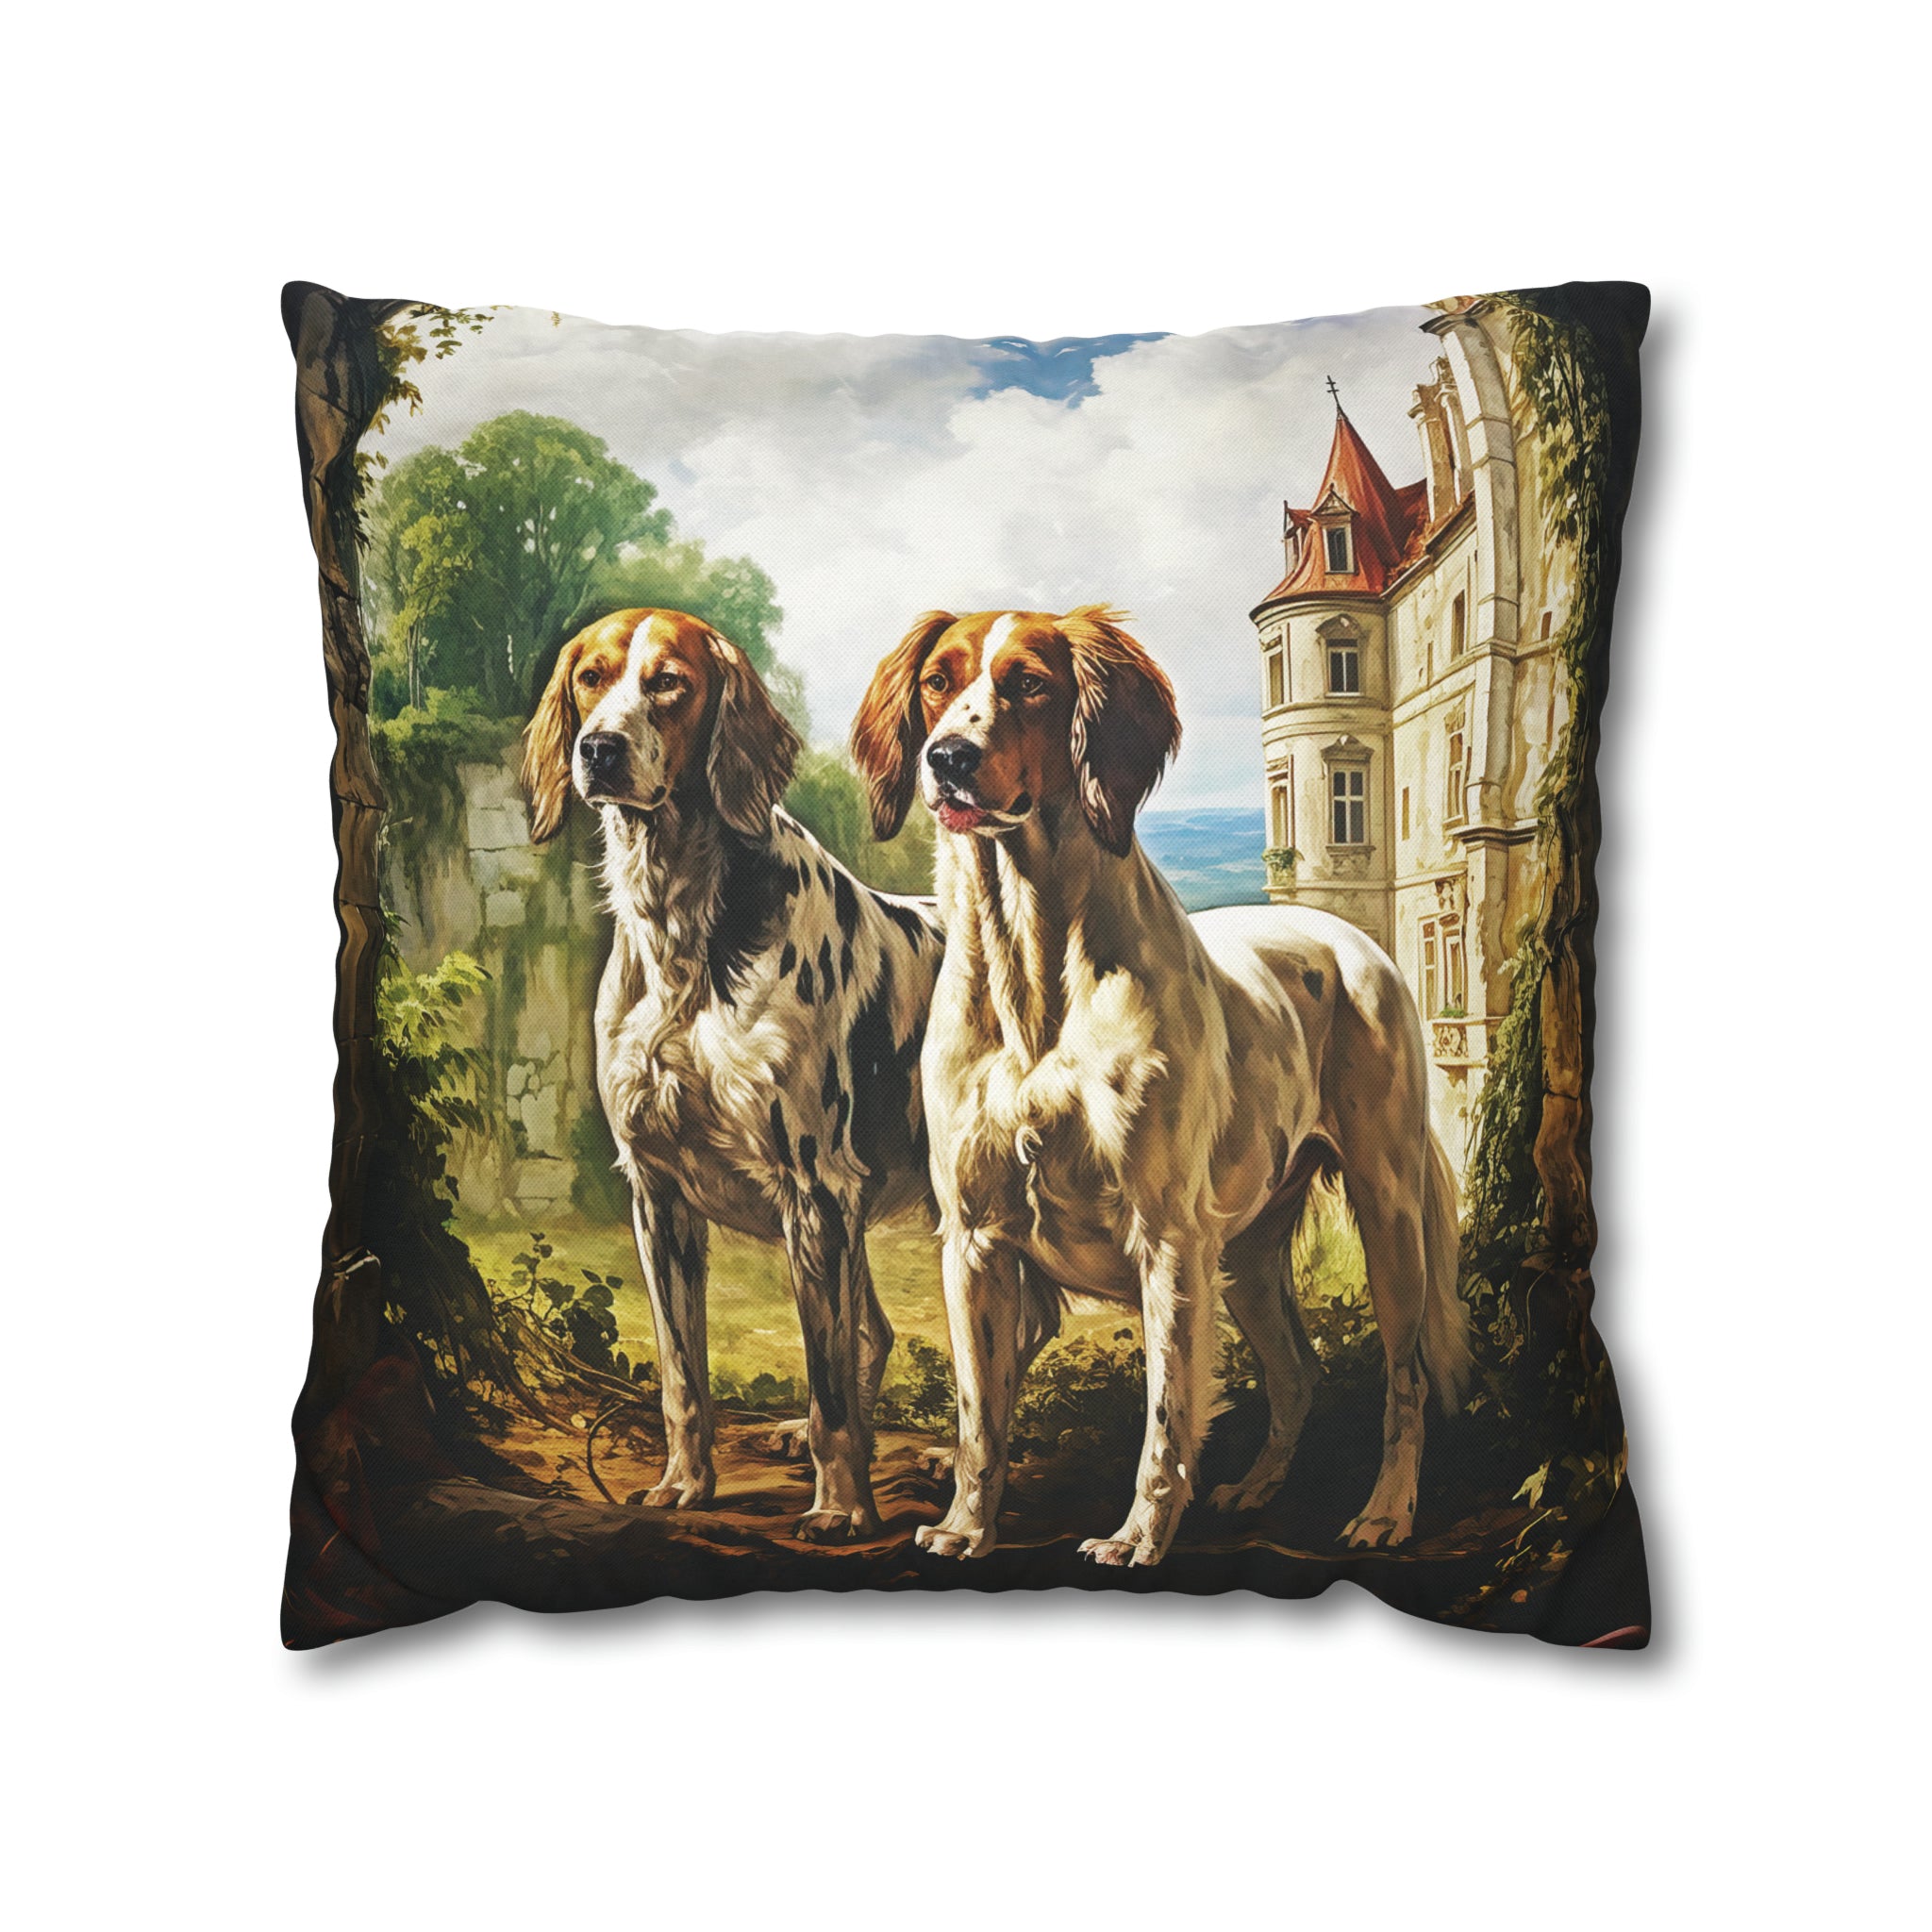 Square Pillow Case 18" x 18", CASE ONLY, no pillow form, original Art ,Colorful, Two Dogs at a French Chateau